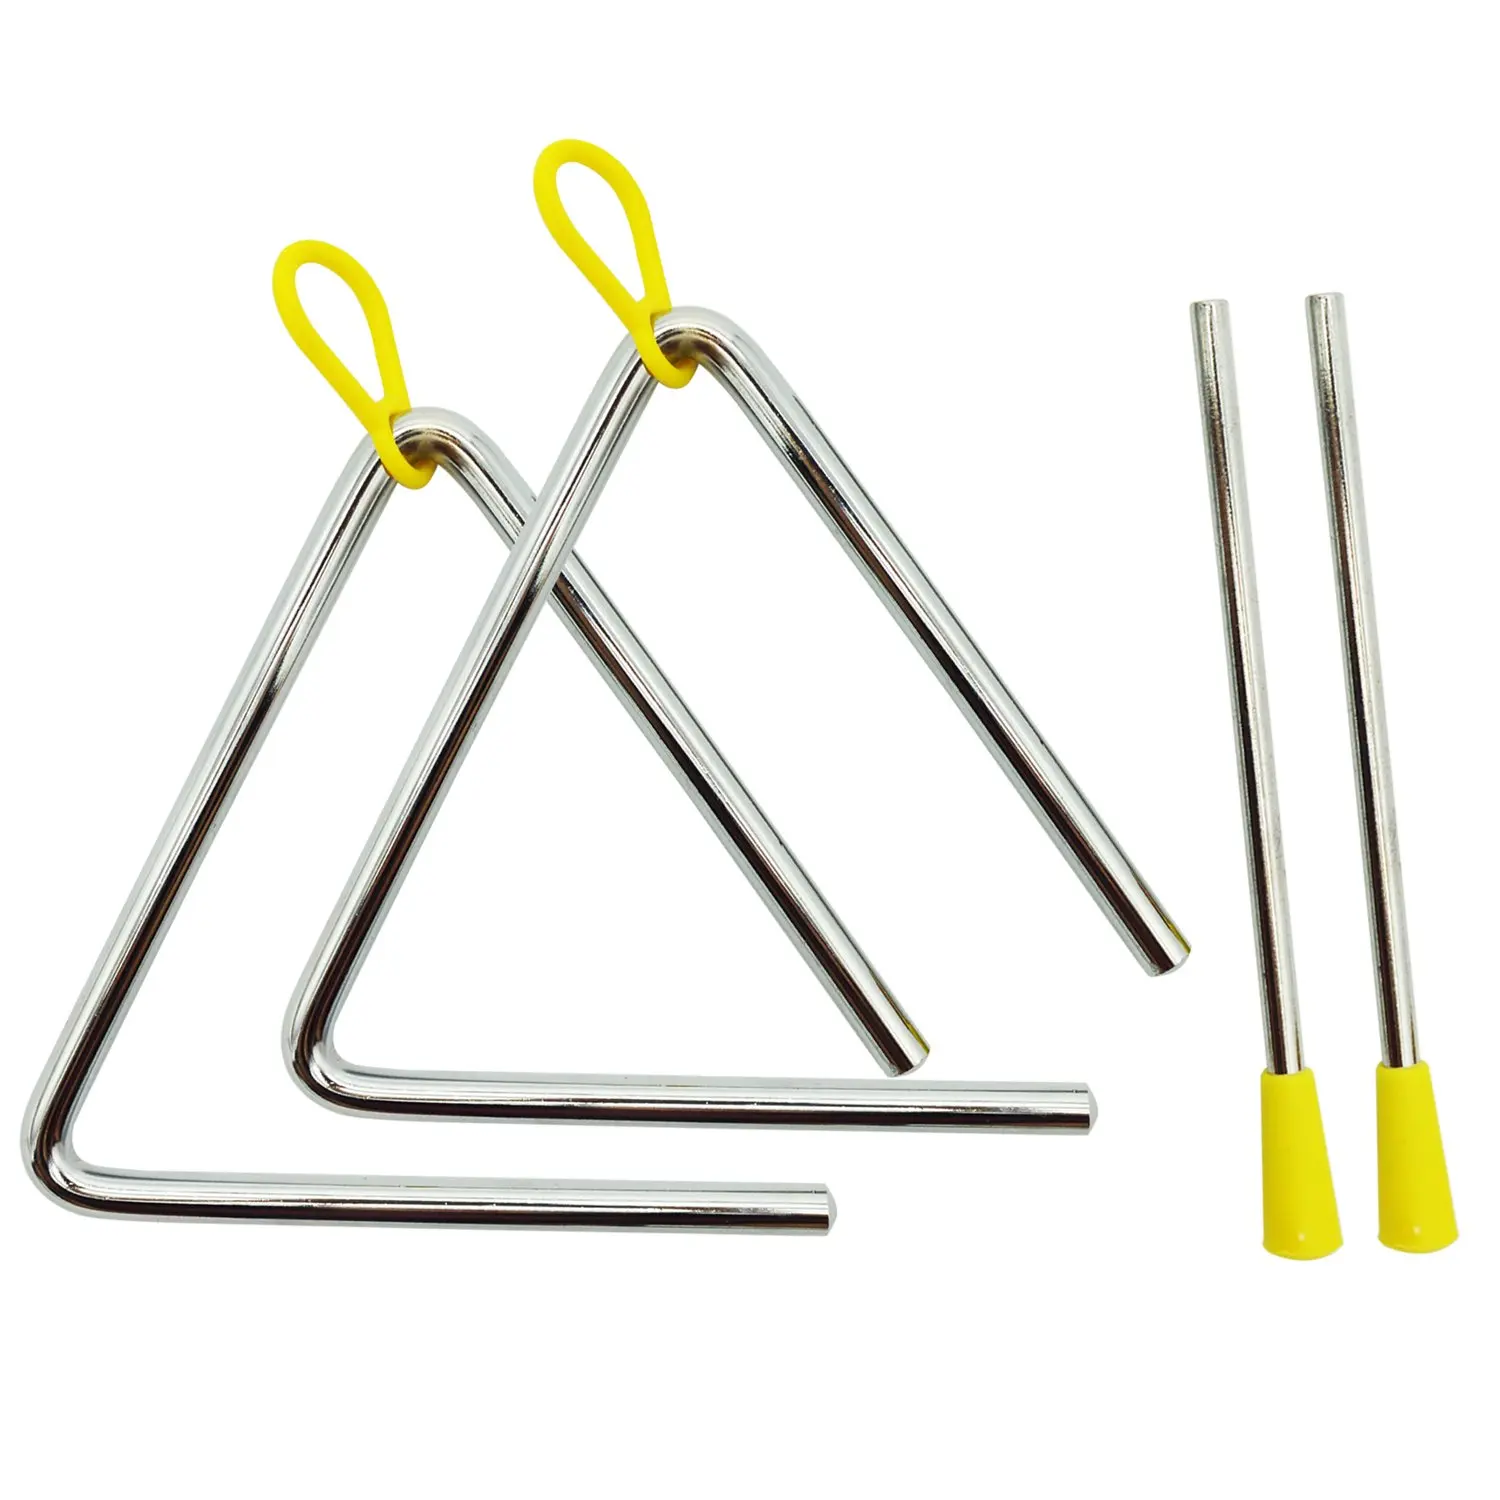 Buy 2pcs Musical Triangle Doubletwo 5 Inch Percussion Triangle Musical